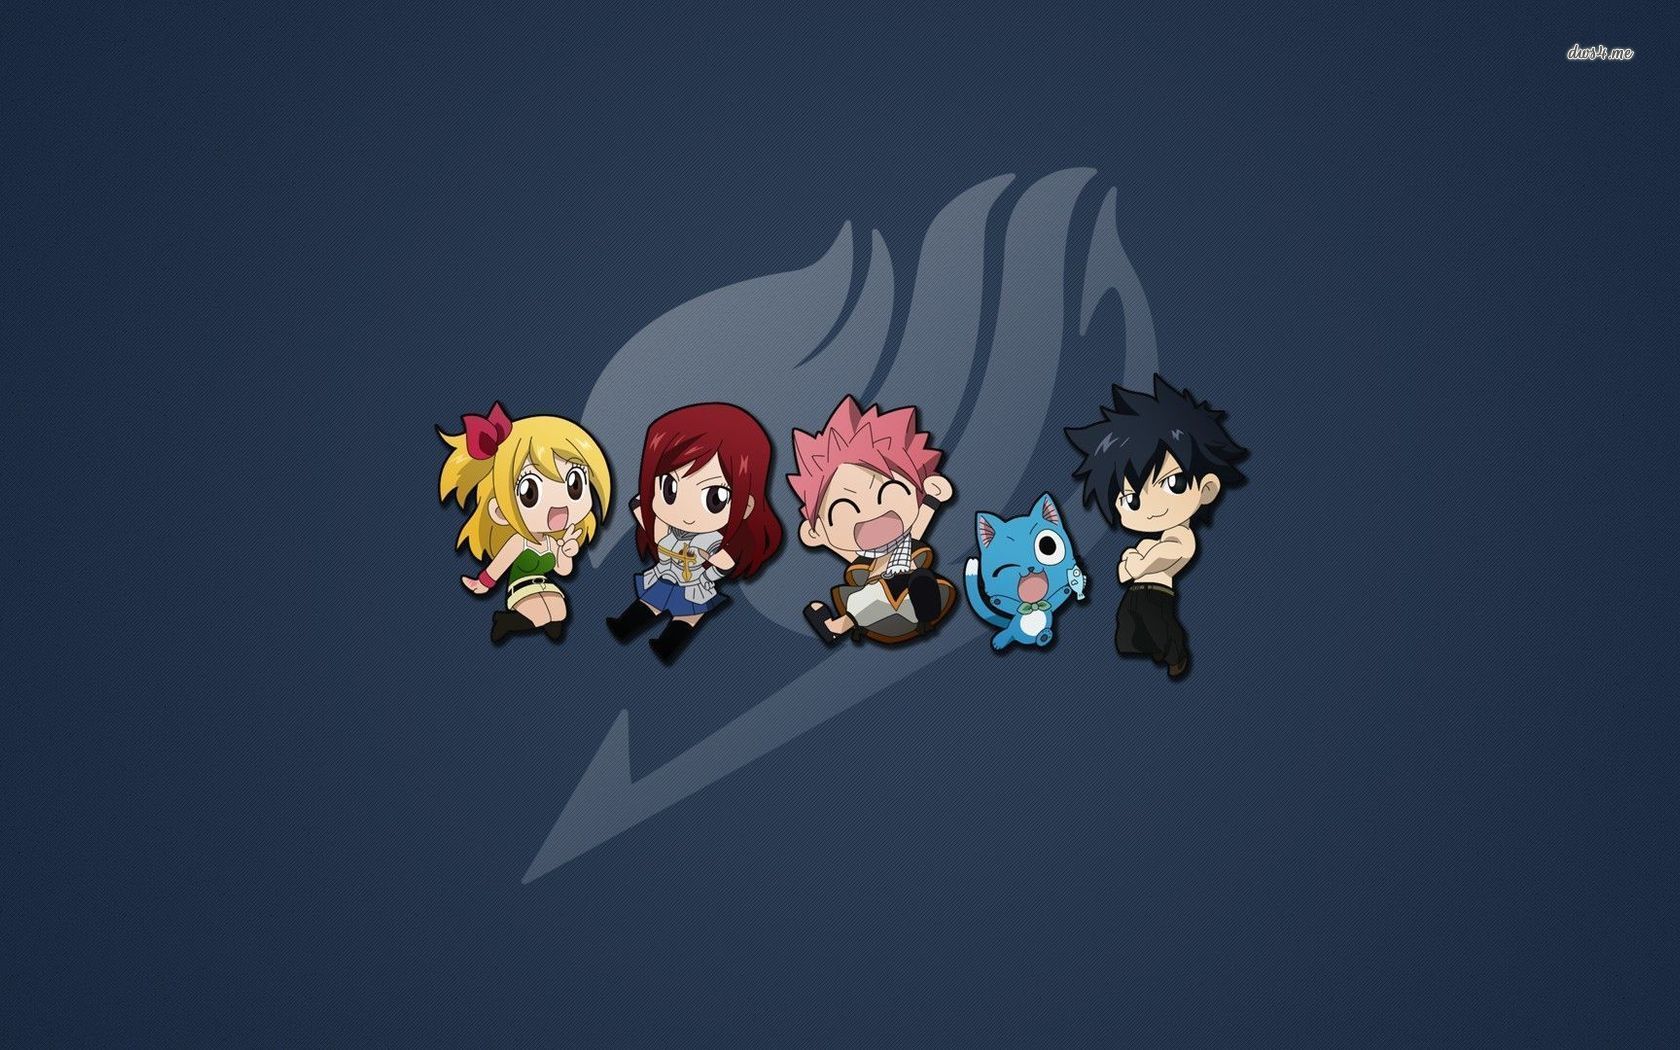 Fairy Tail small characters wallpaper - Anime wallpapers -